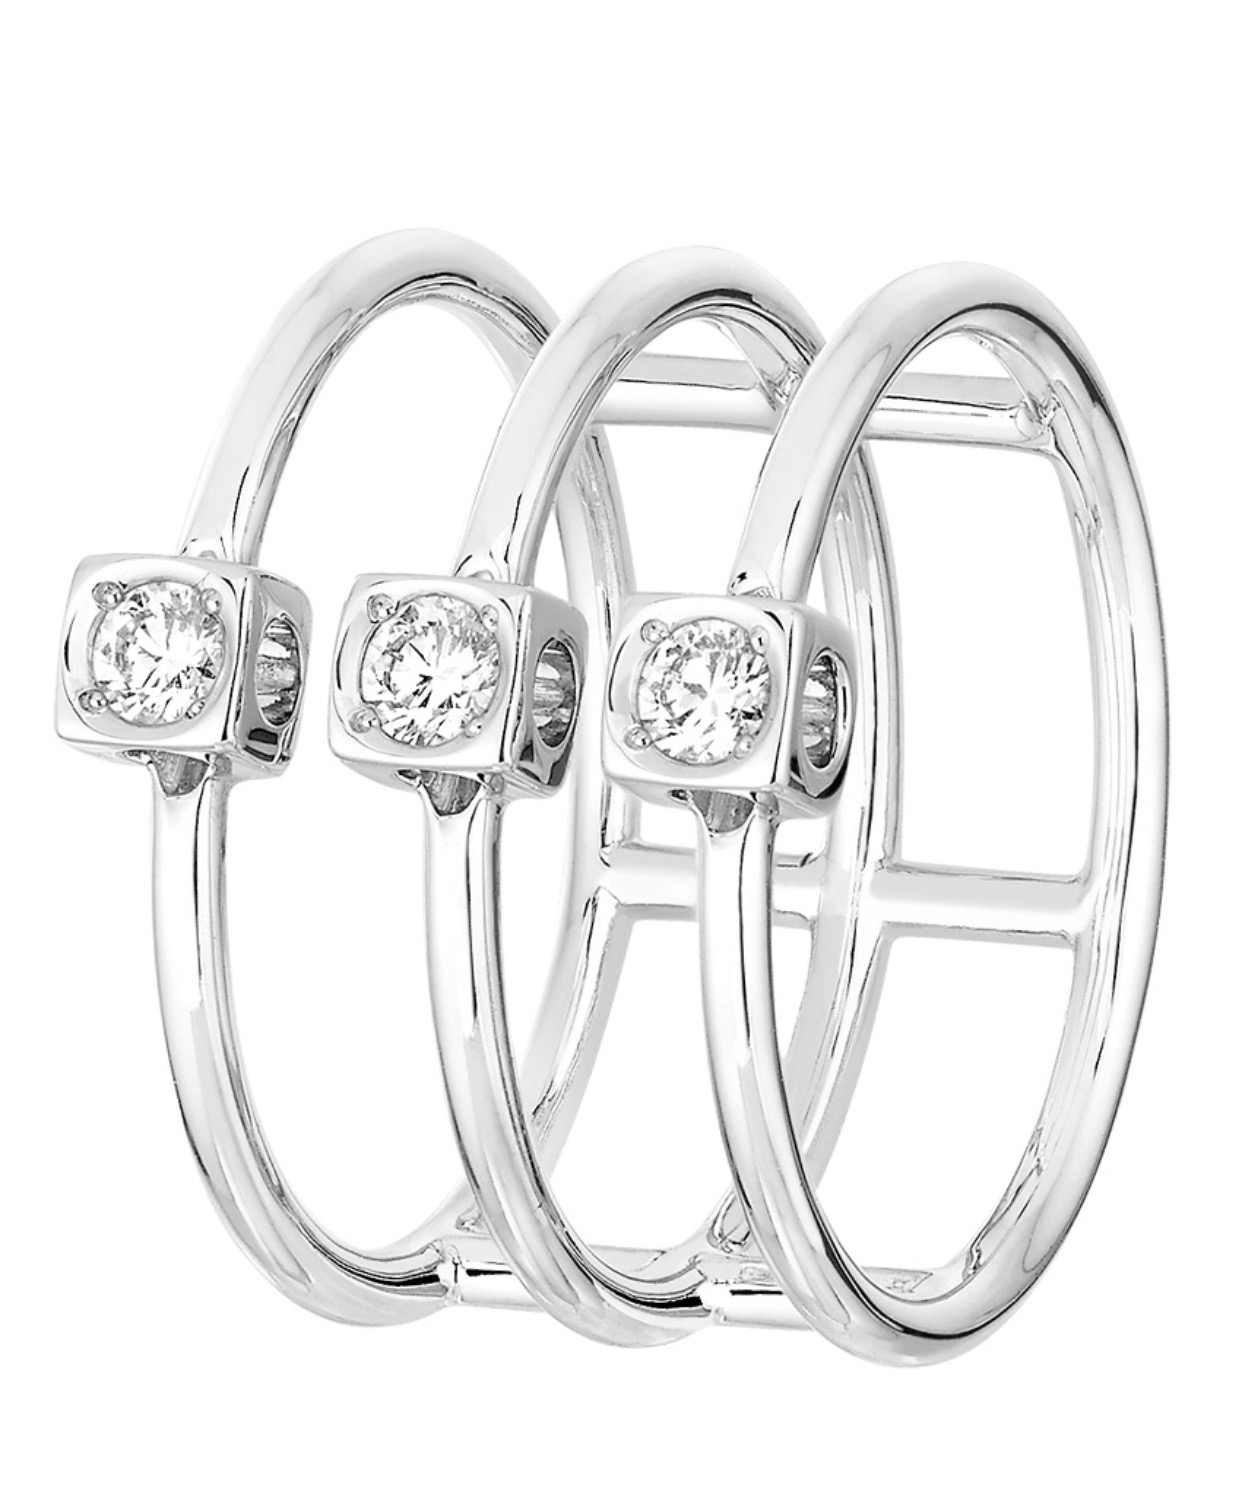 White Gold 18kt With 3 Diamonds ct. 0,21